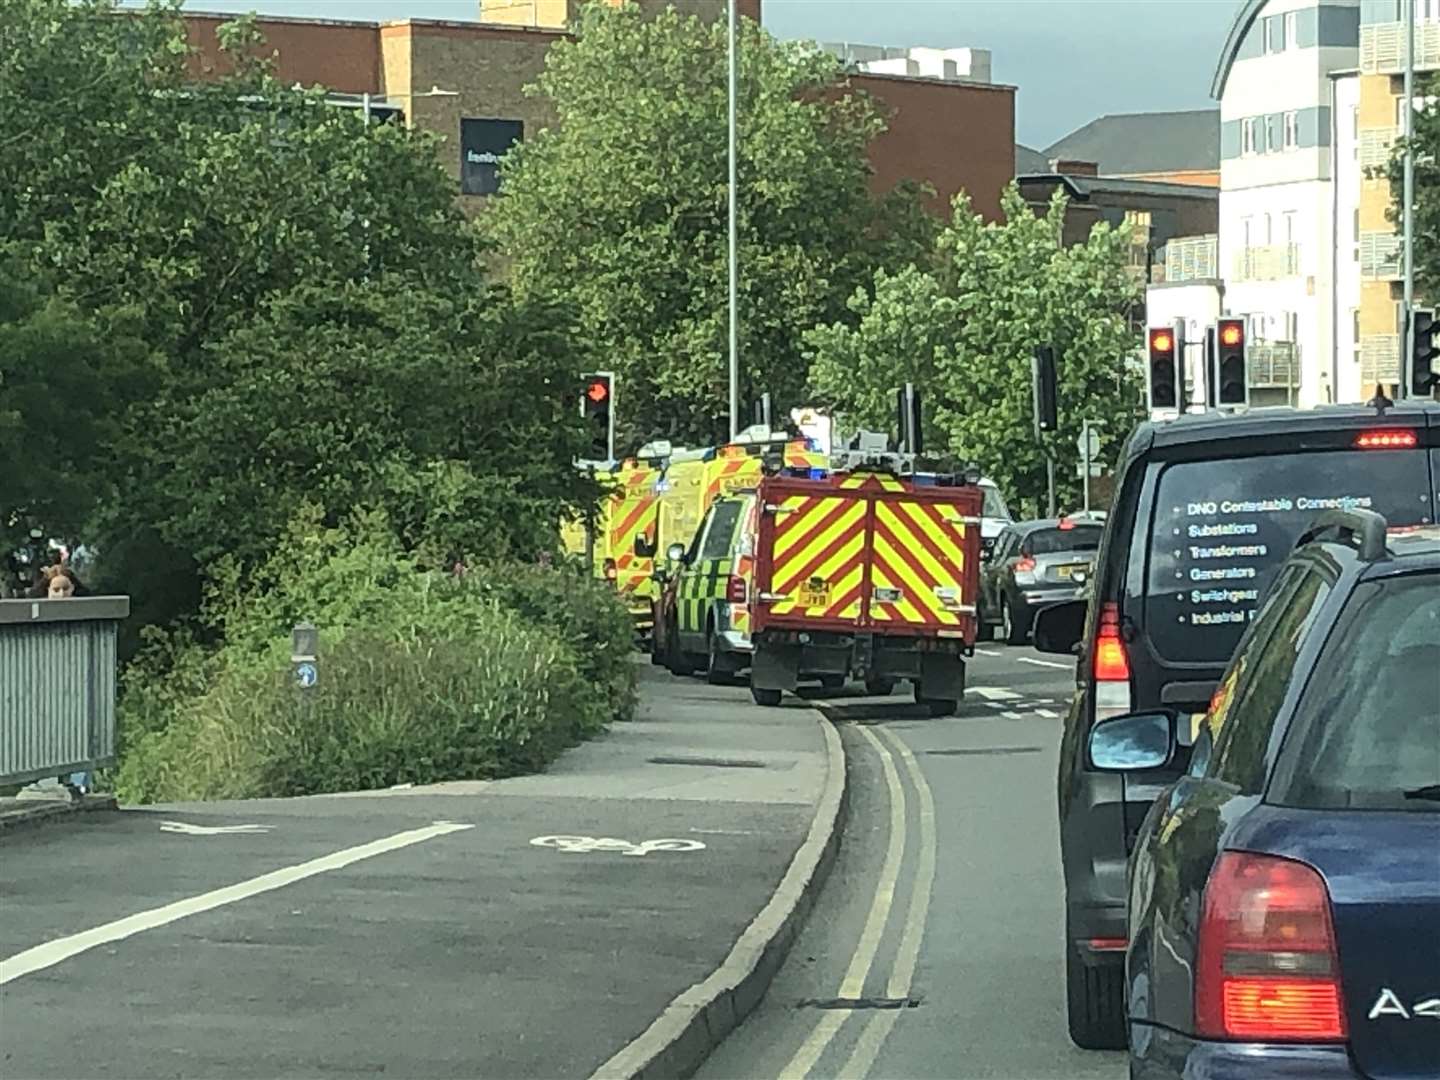 Emergency services near the incident